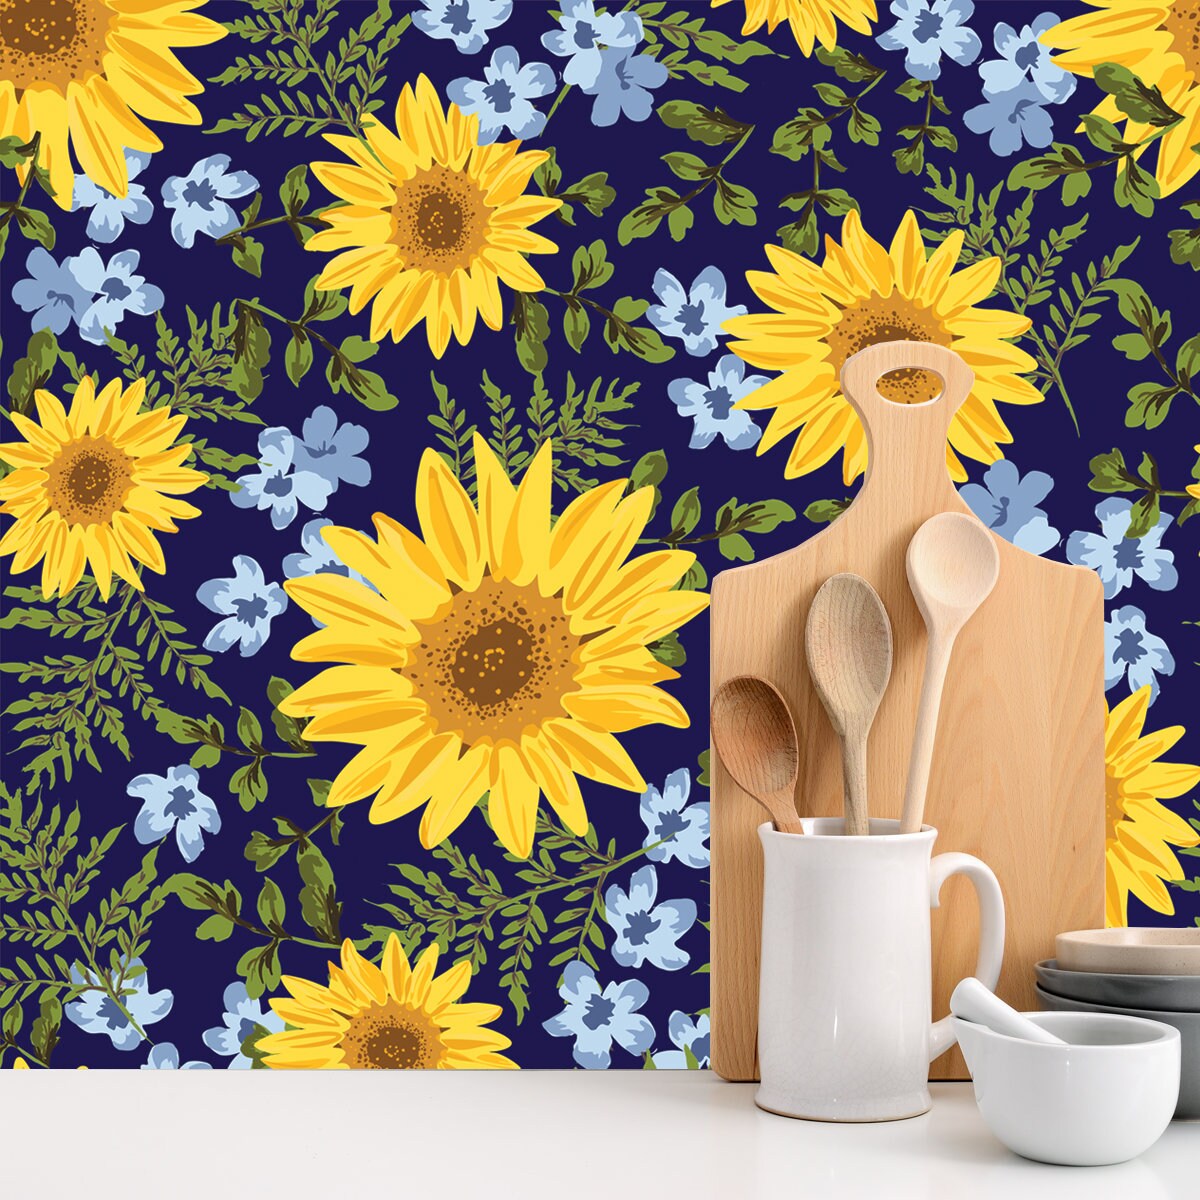 Seamless Pattern with Sunflowers on Navy Background. Ditsy Decorative Floral Design and Foliage Wallpaper Kitchen Mural